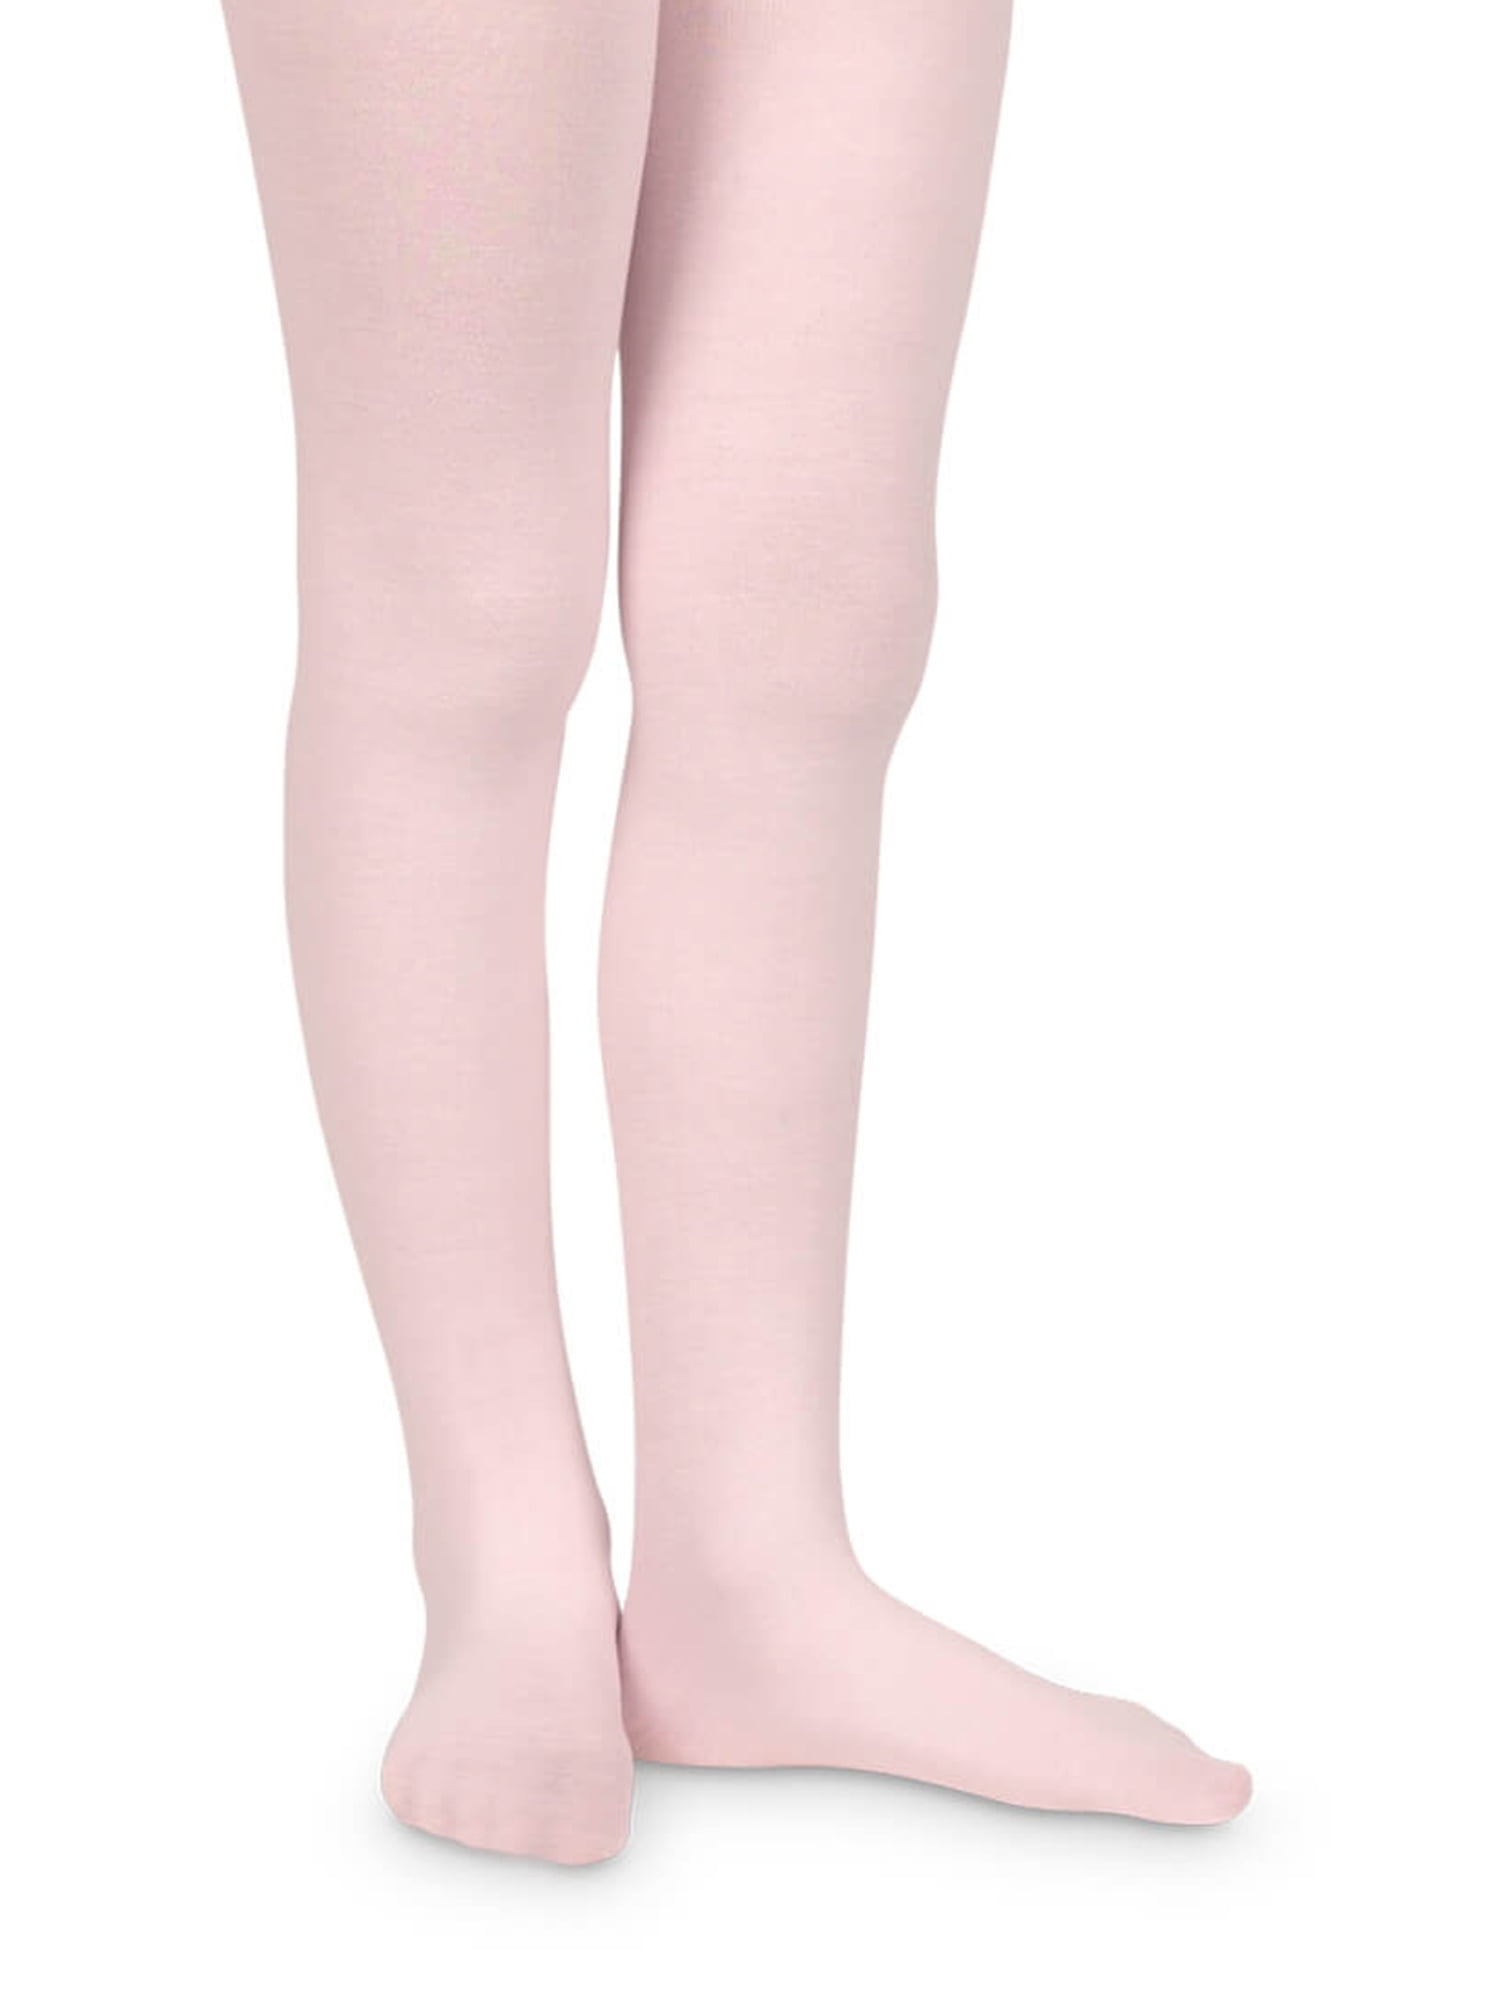 Girls Tights Cotton Rich Plain Black Pink Soft 1 Pair 4-8 Years Back To School